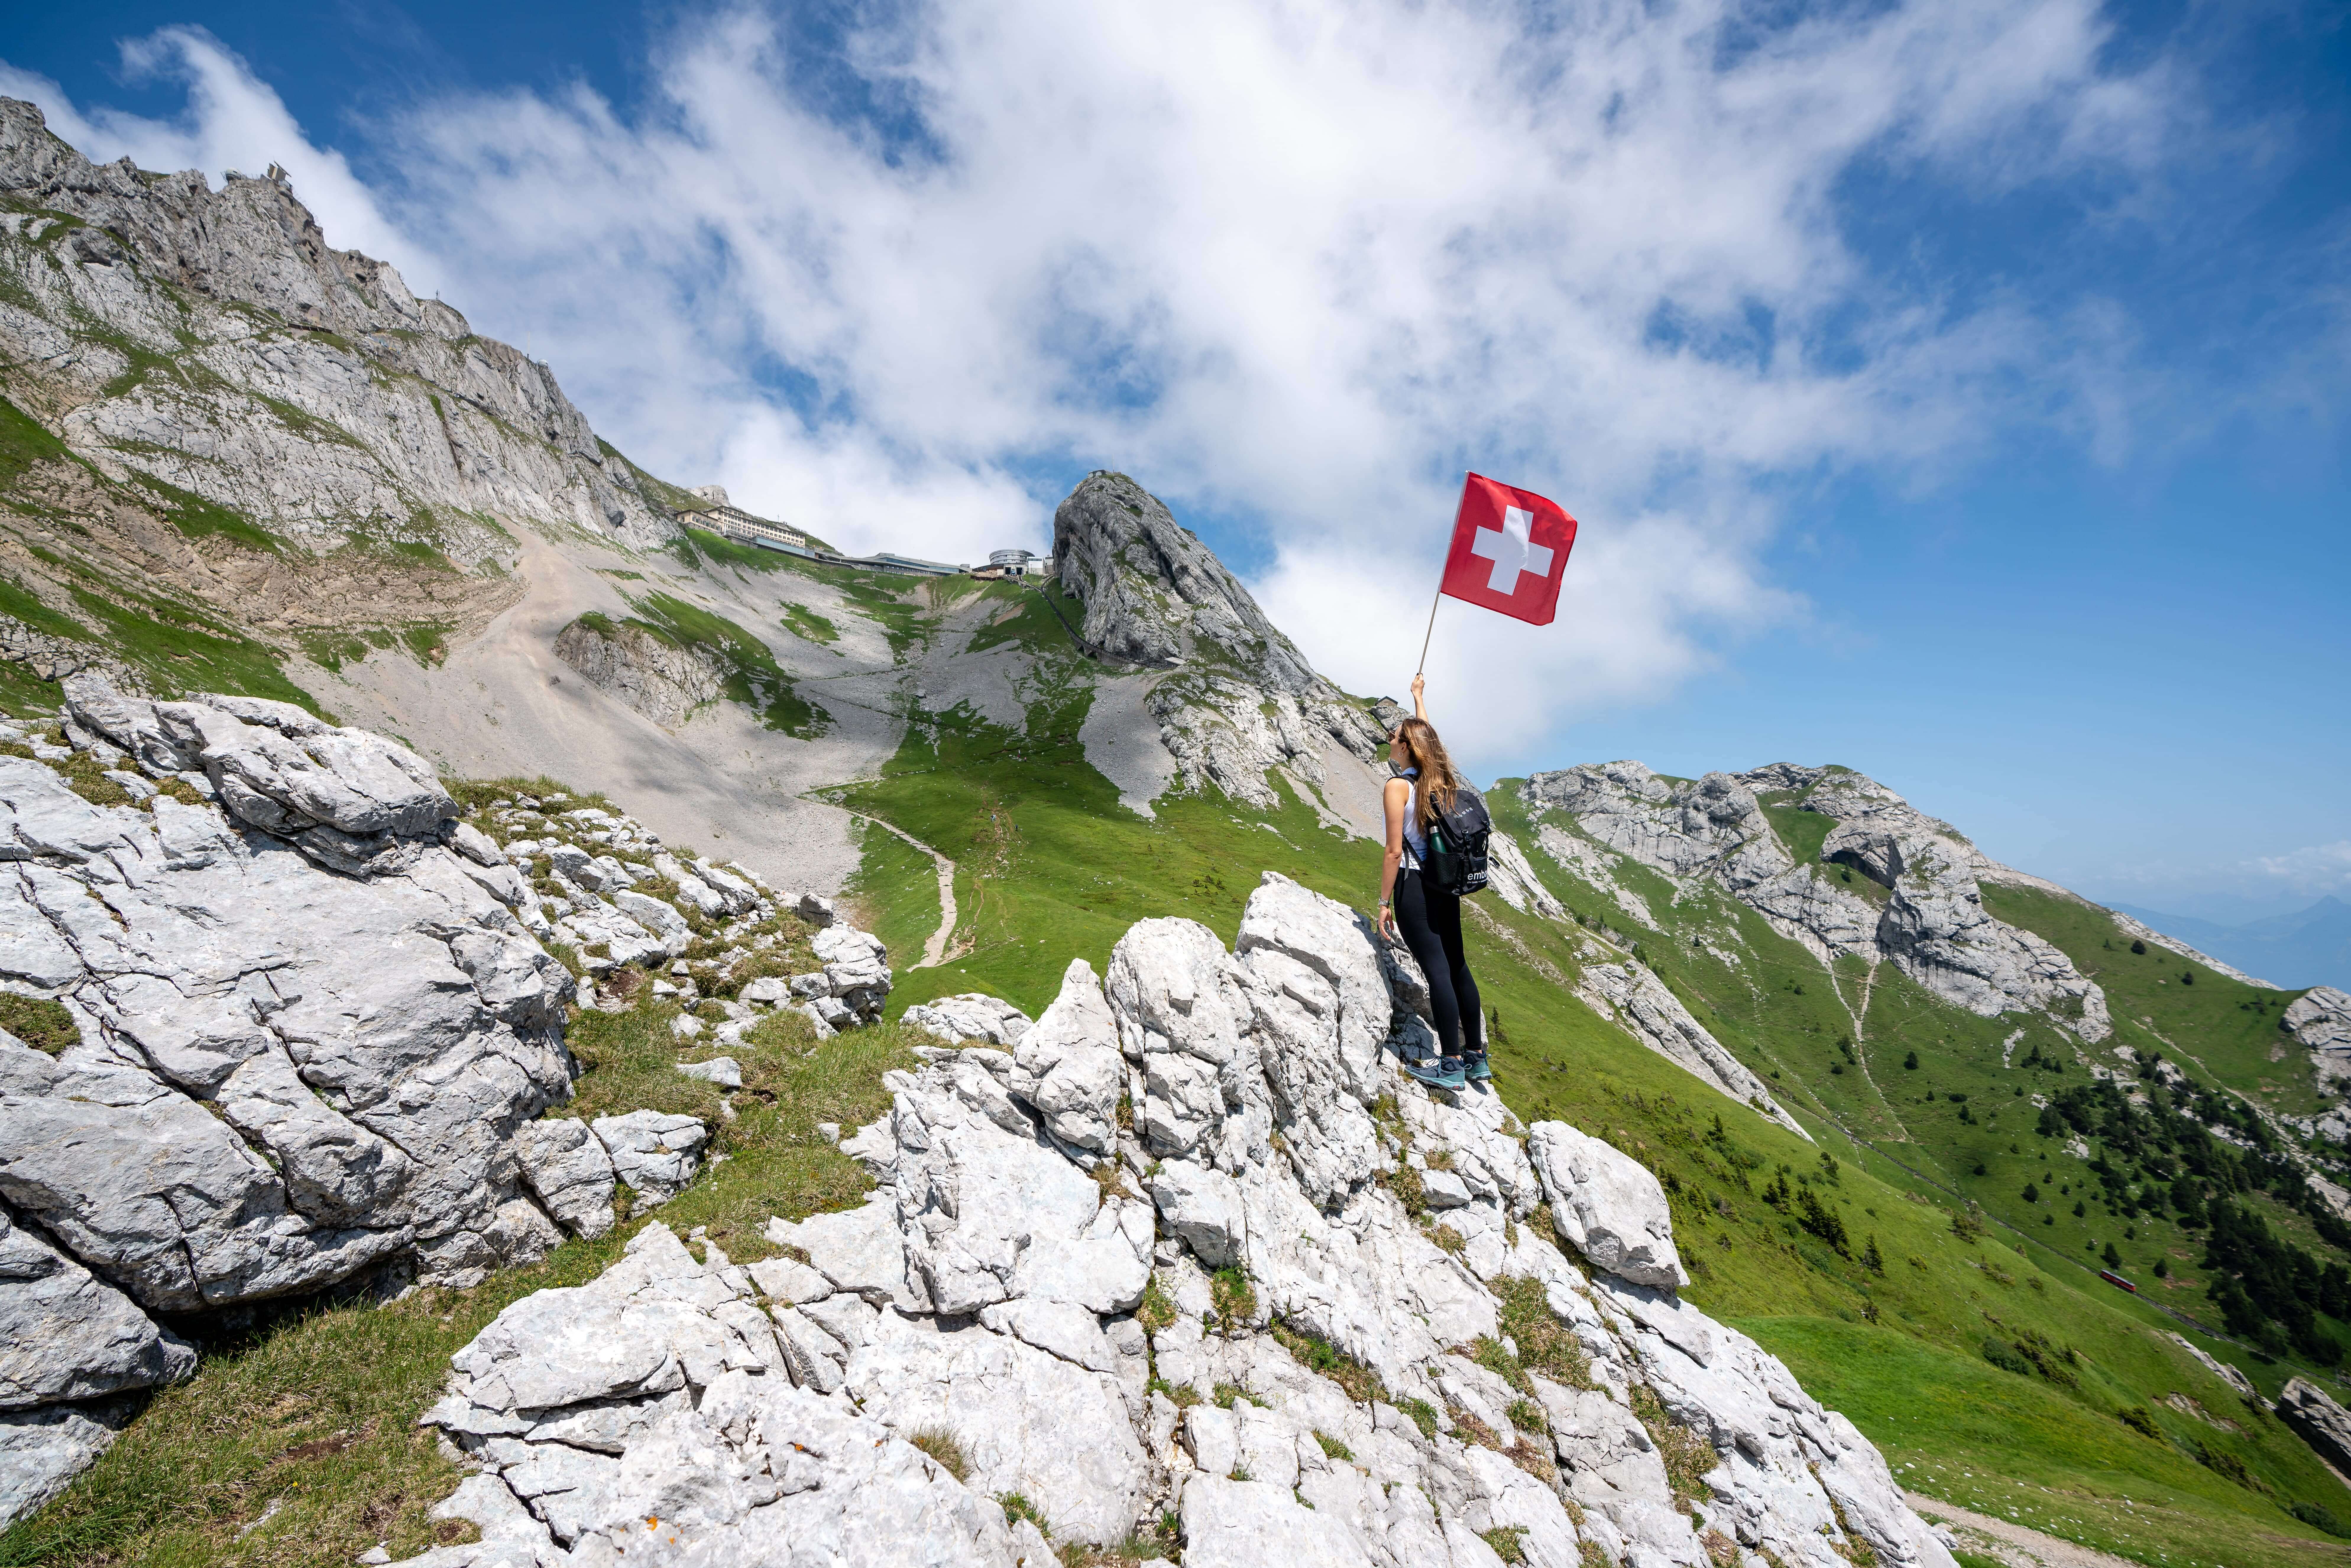 emba X by ETH Zürich and University of St. Gallen: The peak of your personal growth